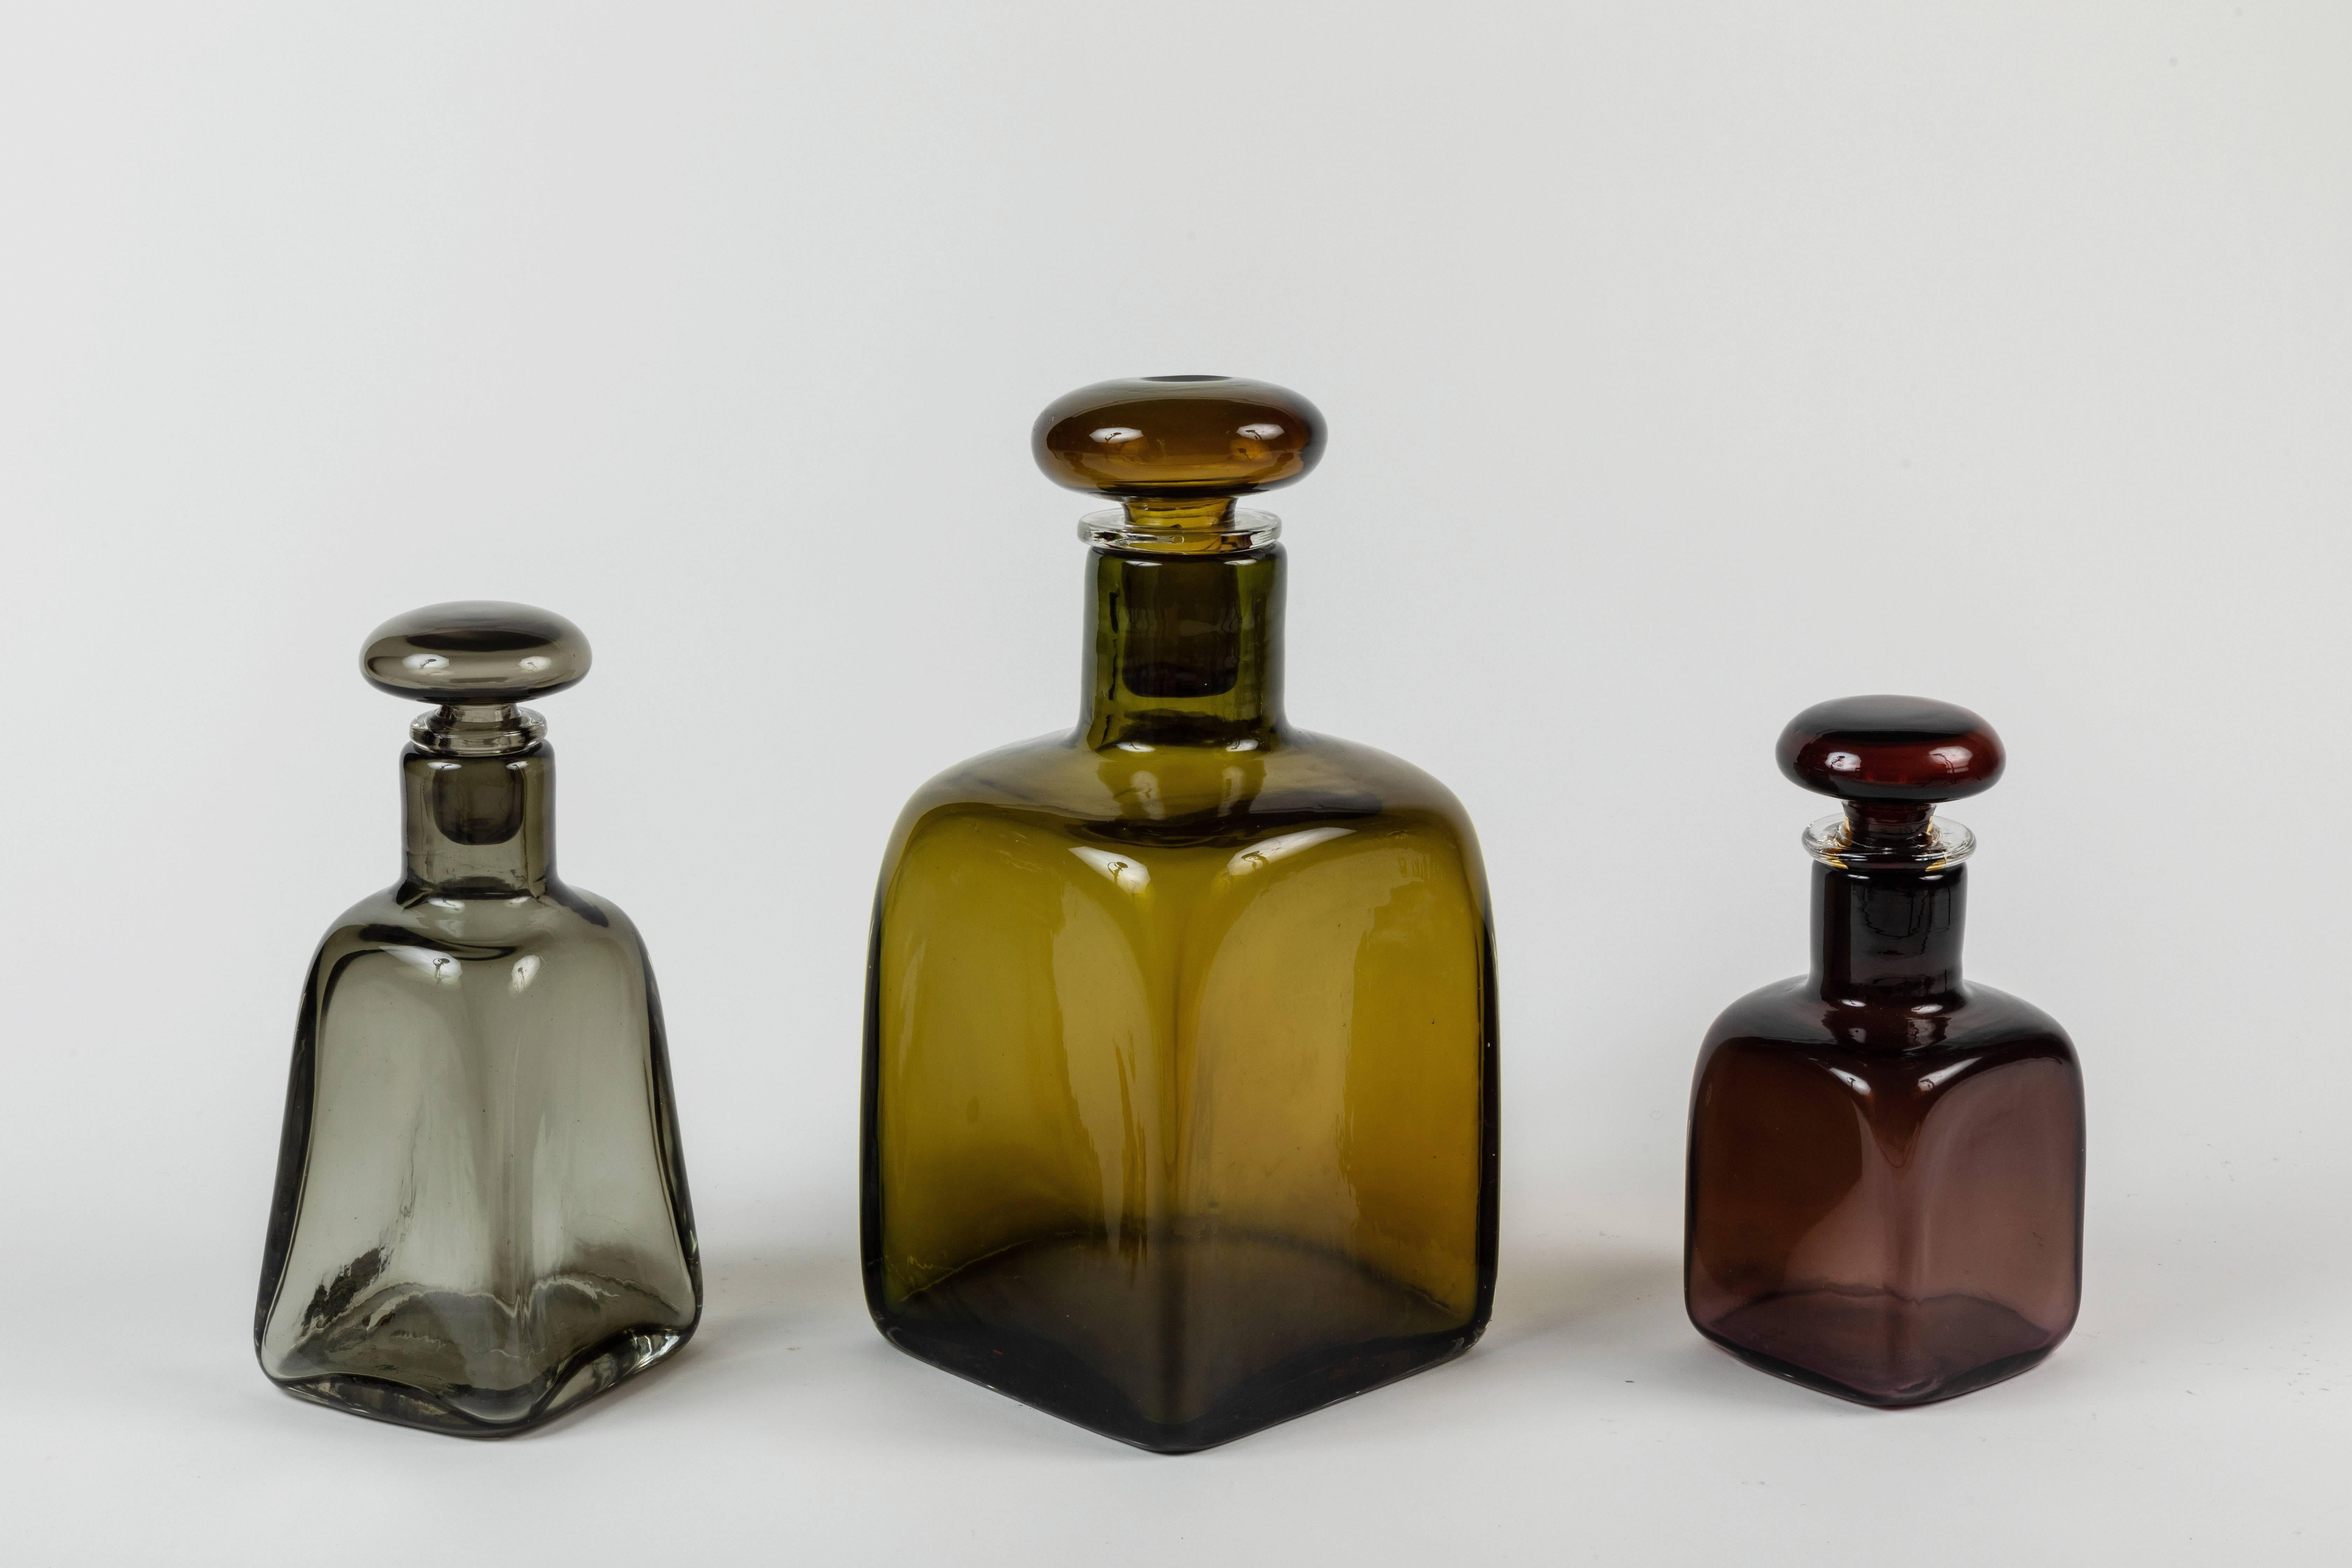 A group of three glass bottles with stoppers by one of the leading figures in the production of Murano glass, and an important contributor to 20th-century design, Paolo Venini (1895 - 1959). Bottles are each a different color cased glass while the